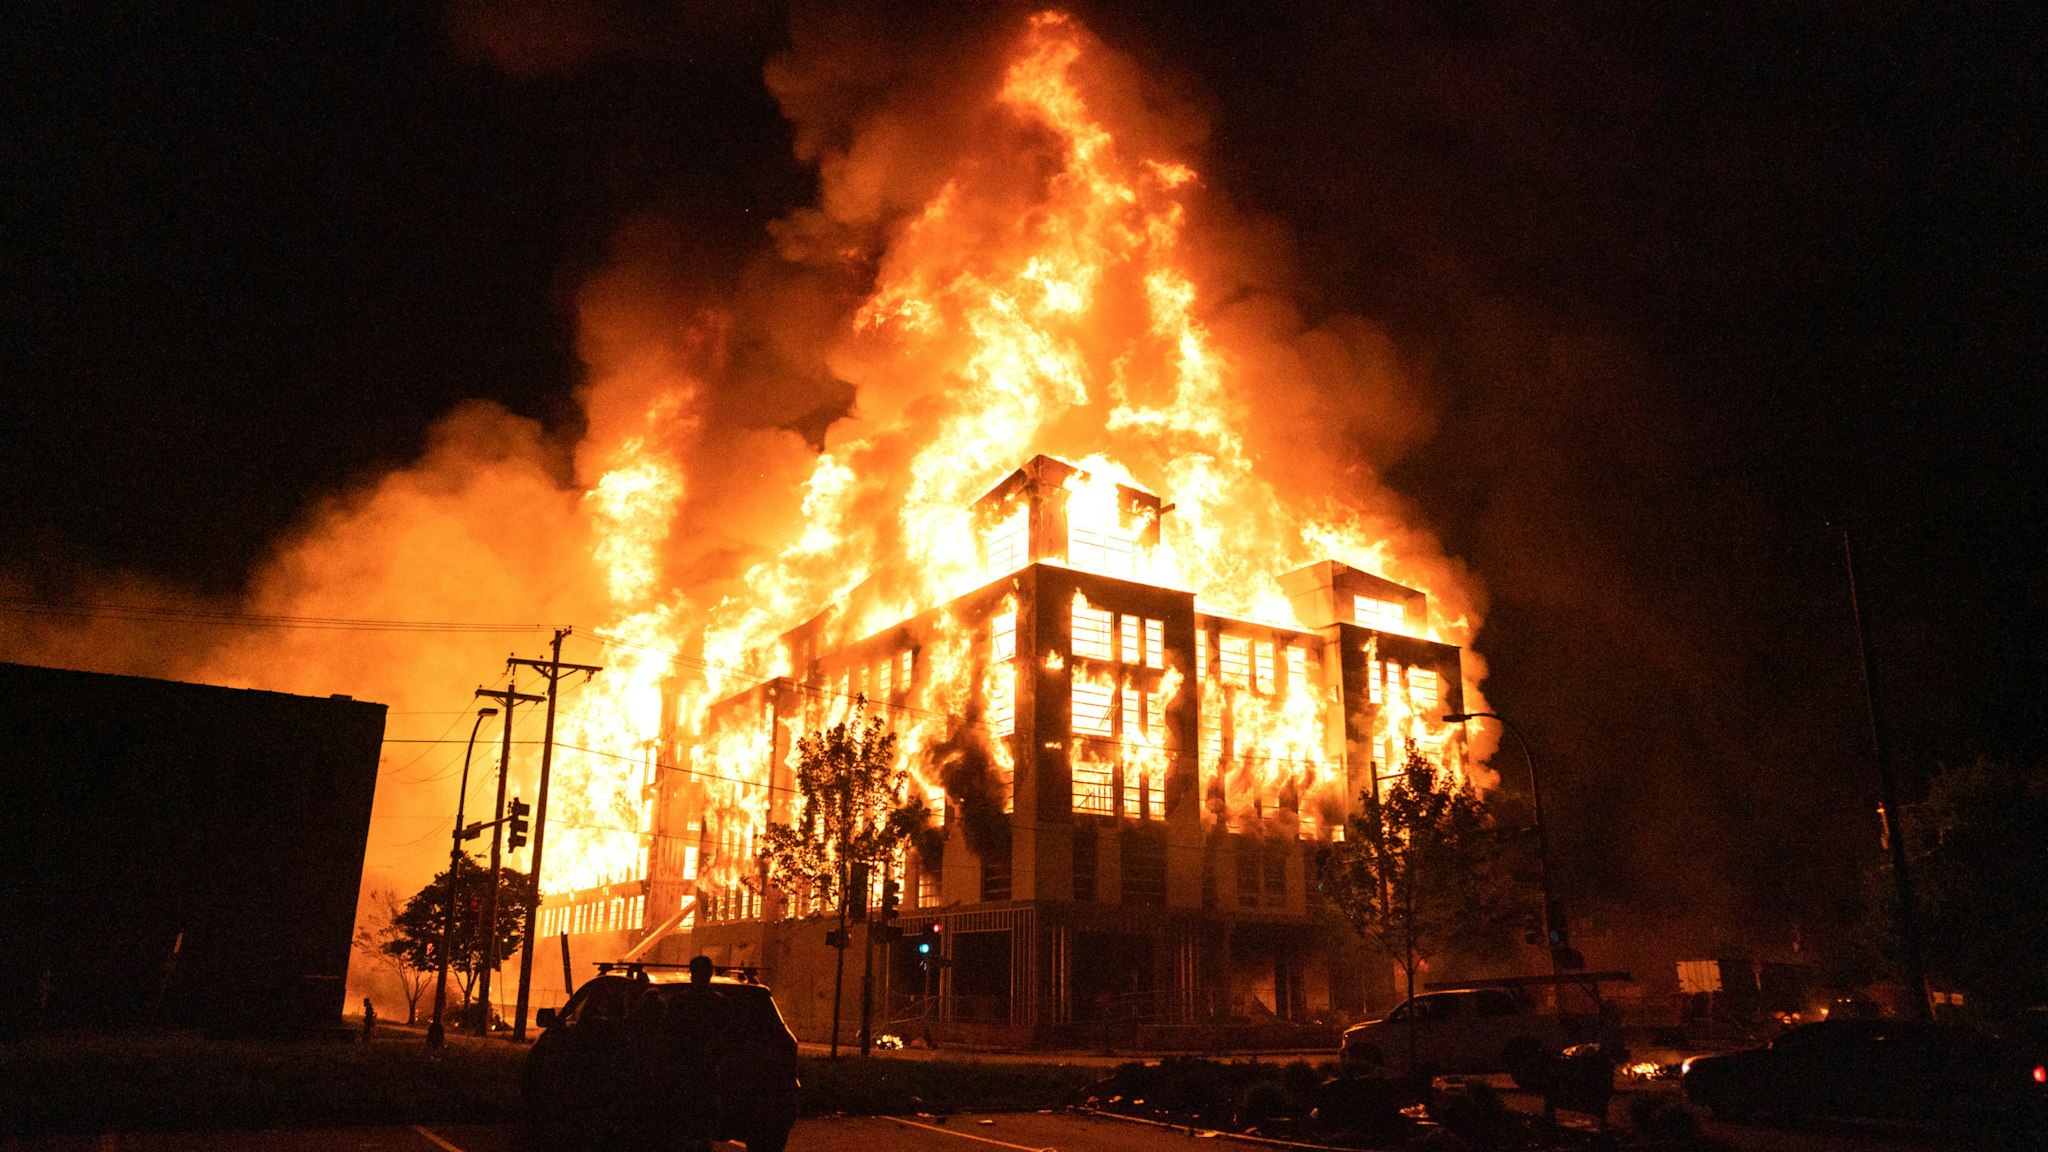 MINNEAPOLIS, MN - MAY 27: Rioters set fire to a multi-story affordable housing complex under construction near the Third Precinct, spreading the blaze to surrounding homes. Protester and police clashed violently in South Minneapolis as looters attacked business on Lake Street on Wednesday, May 27, 2020 in Minneapolis. The protests were sparked by the death of George Floyd at the hands of a Minneapolis Police officer Monday.